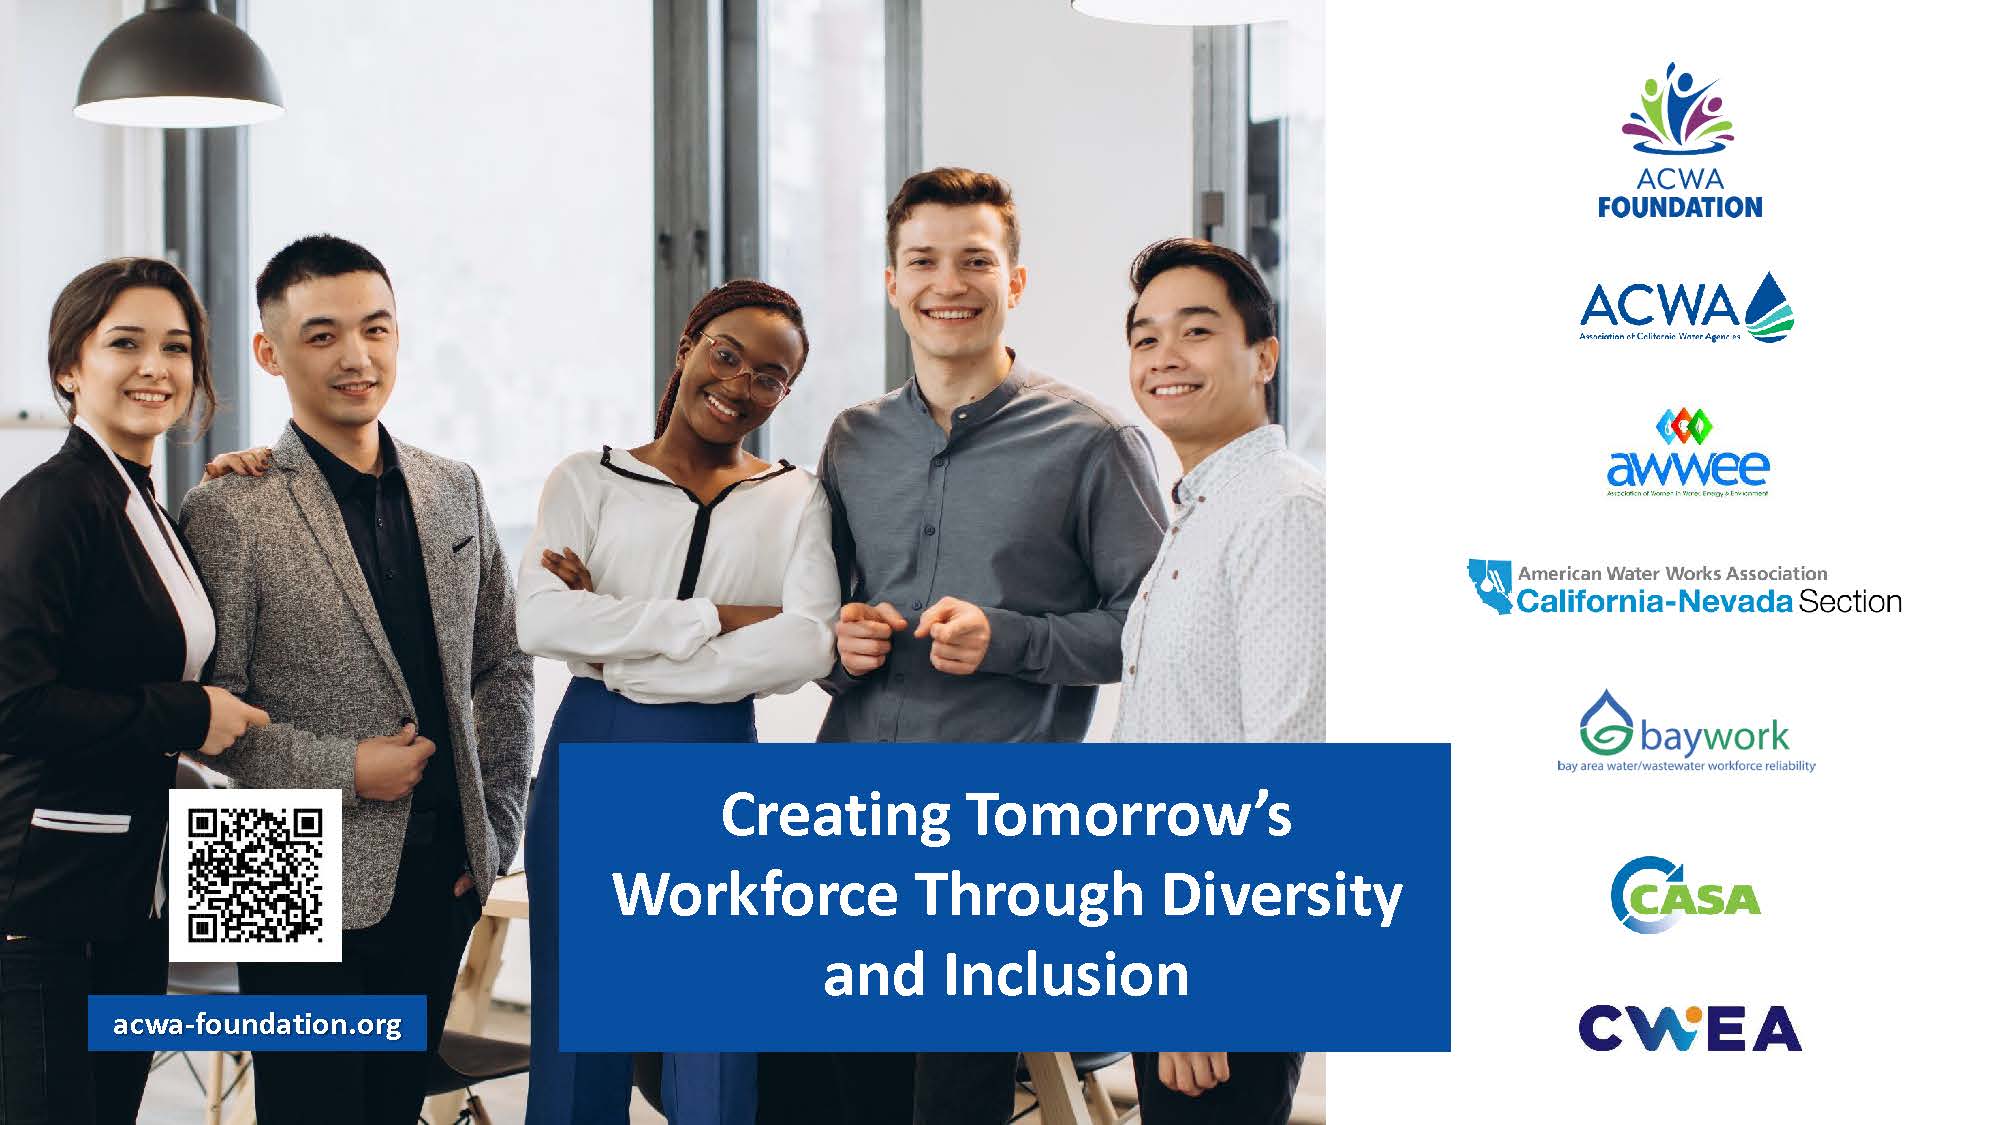 Video: Creating Tomorrow’s Workforce Through Diversity and Inclusion